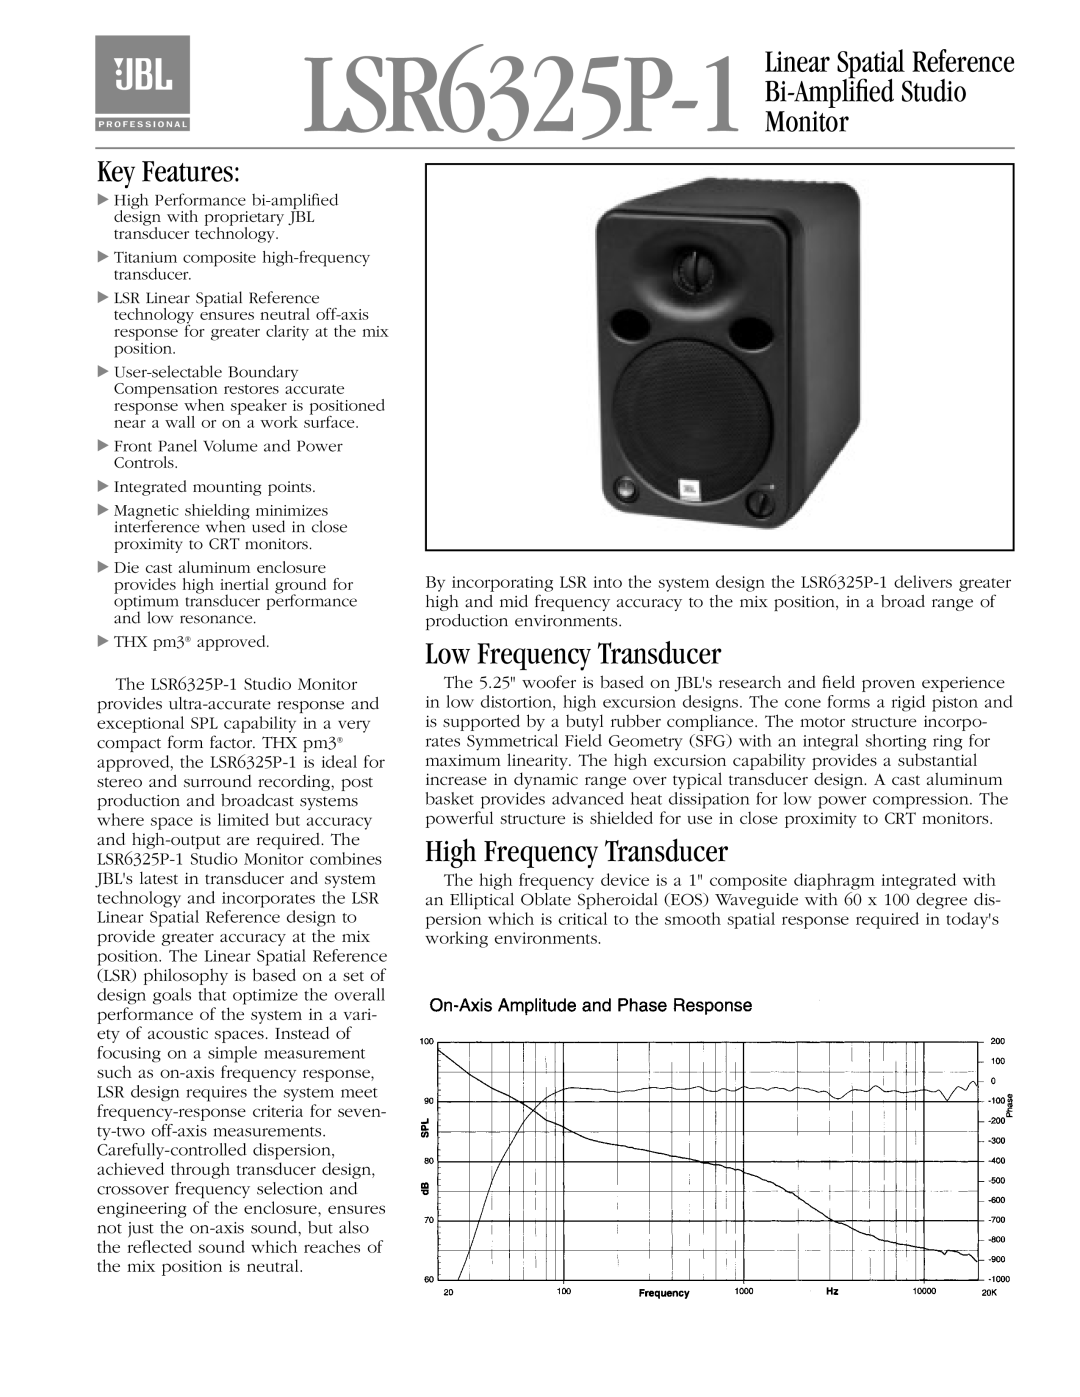 JBL manual LSR6325P-1 Linear Spatial Reference, Bi-AmpliﬁedStudio Monitor Key Features, Low Frequency Transducer 